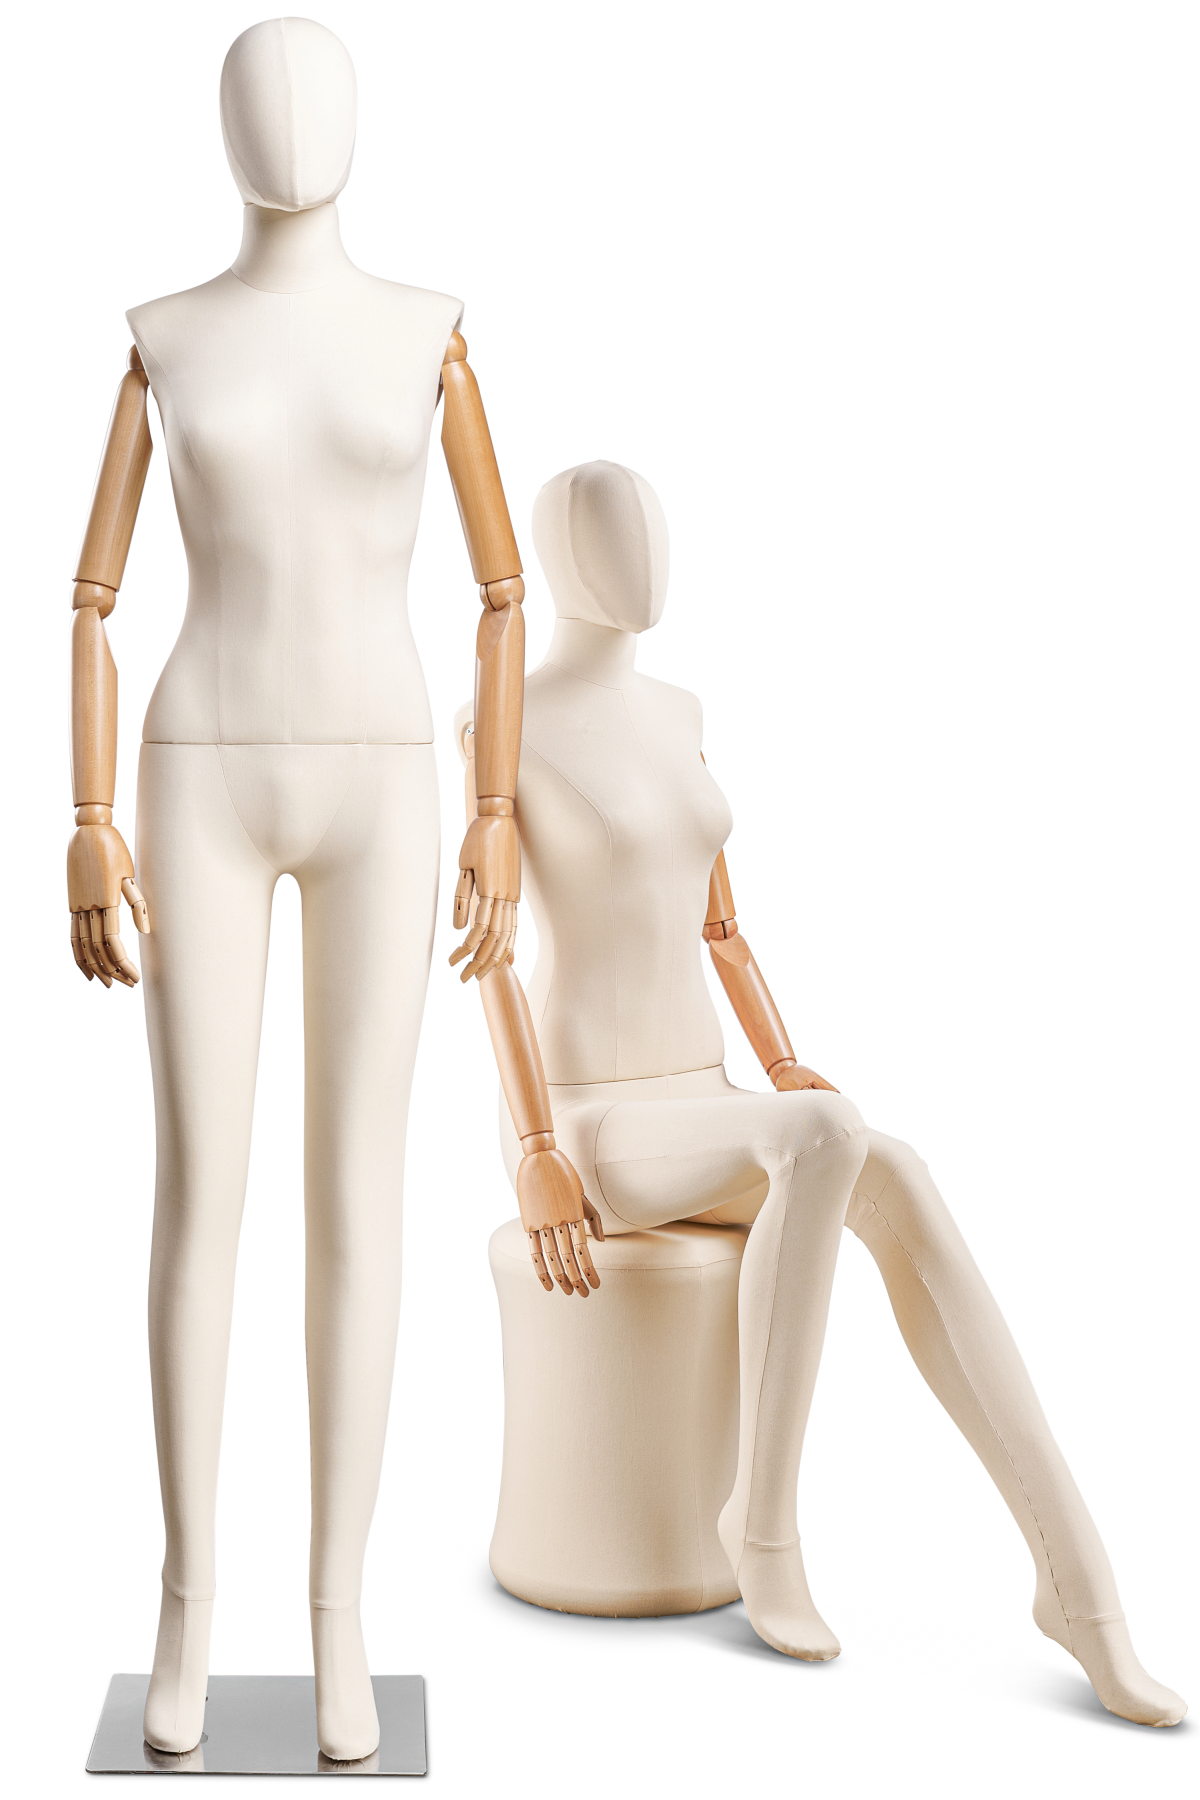 Female Mannequin Full Body - Various Poses, GRP Display Mannequins for  Retail, Dummy Model Display Torso, Gold Model Props for Clothing Store/Shop  Window ( : Amazon.de: Home & Kitchen